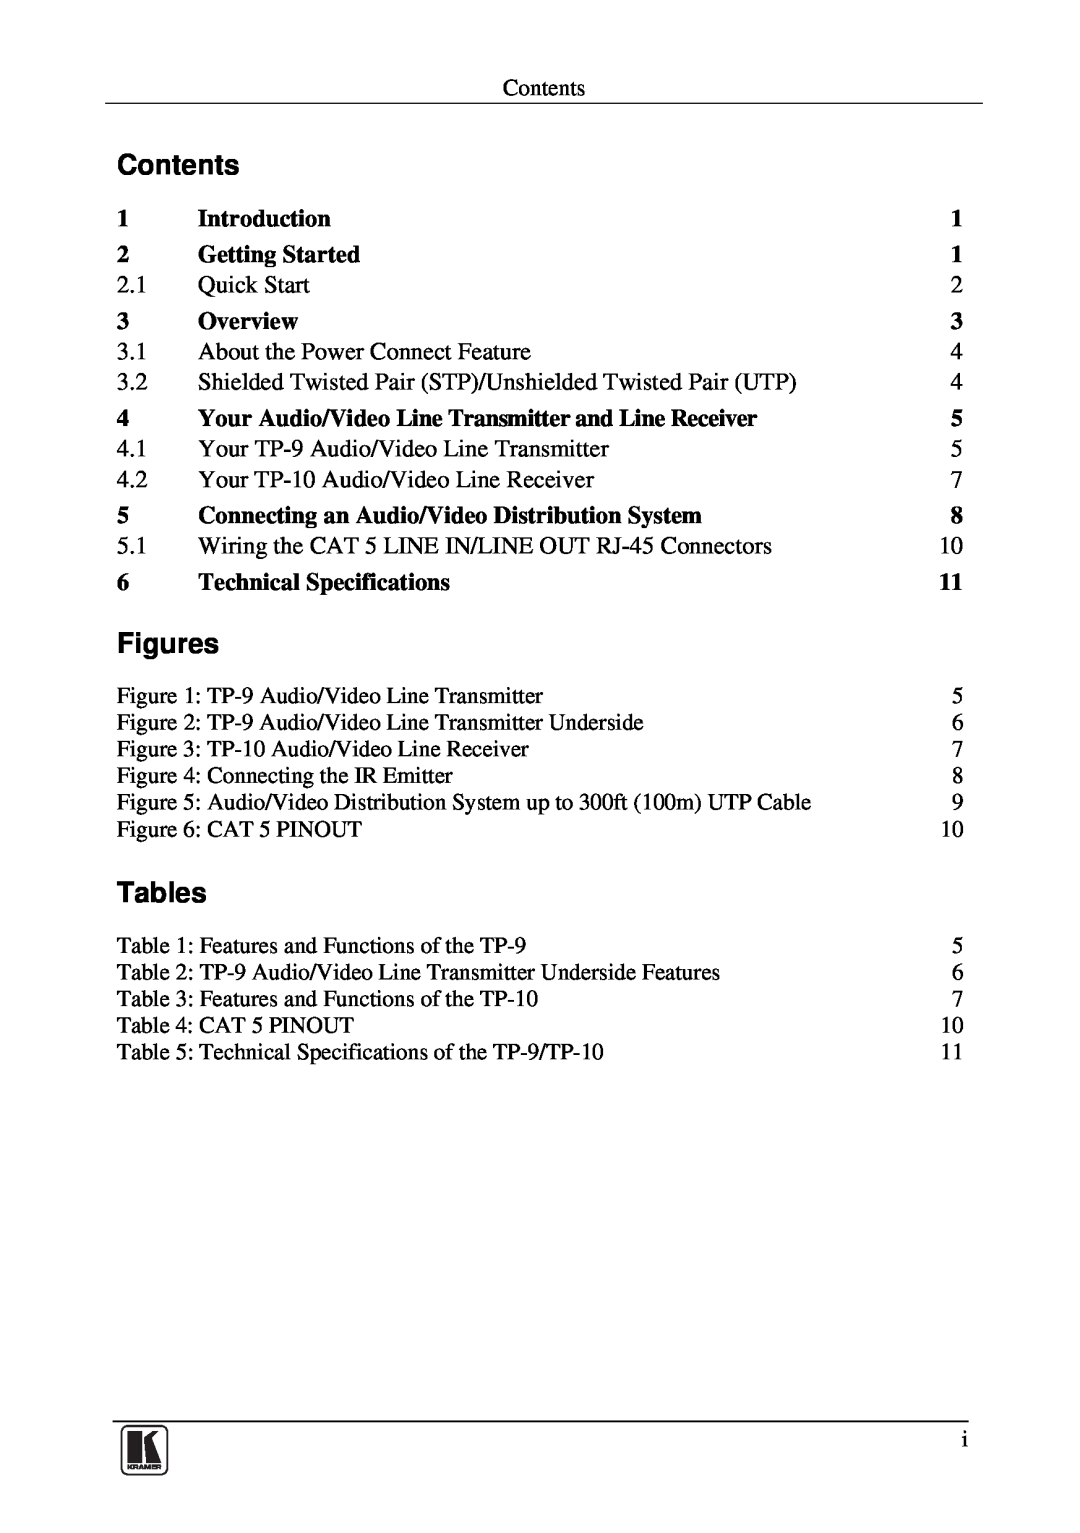 Kramer Electronics TP-9 Contents, Figures, Tables, Introduction, Getting Started, Overview, Technical Specifications 